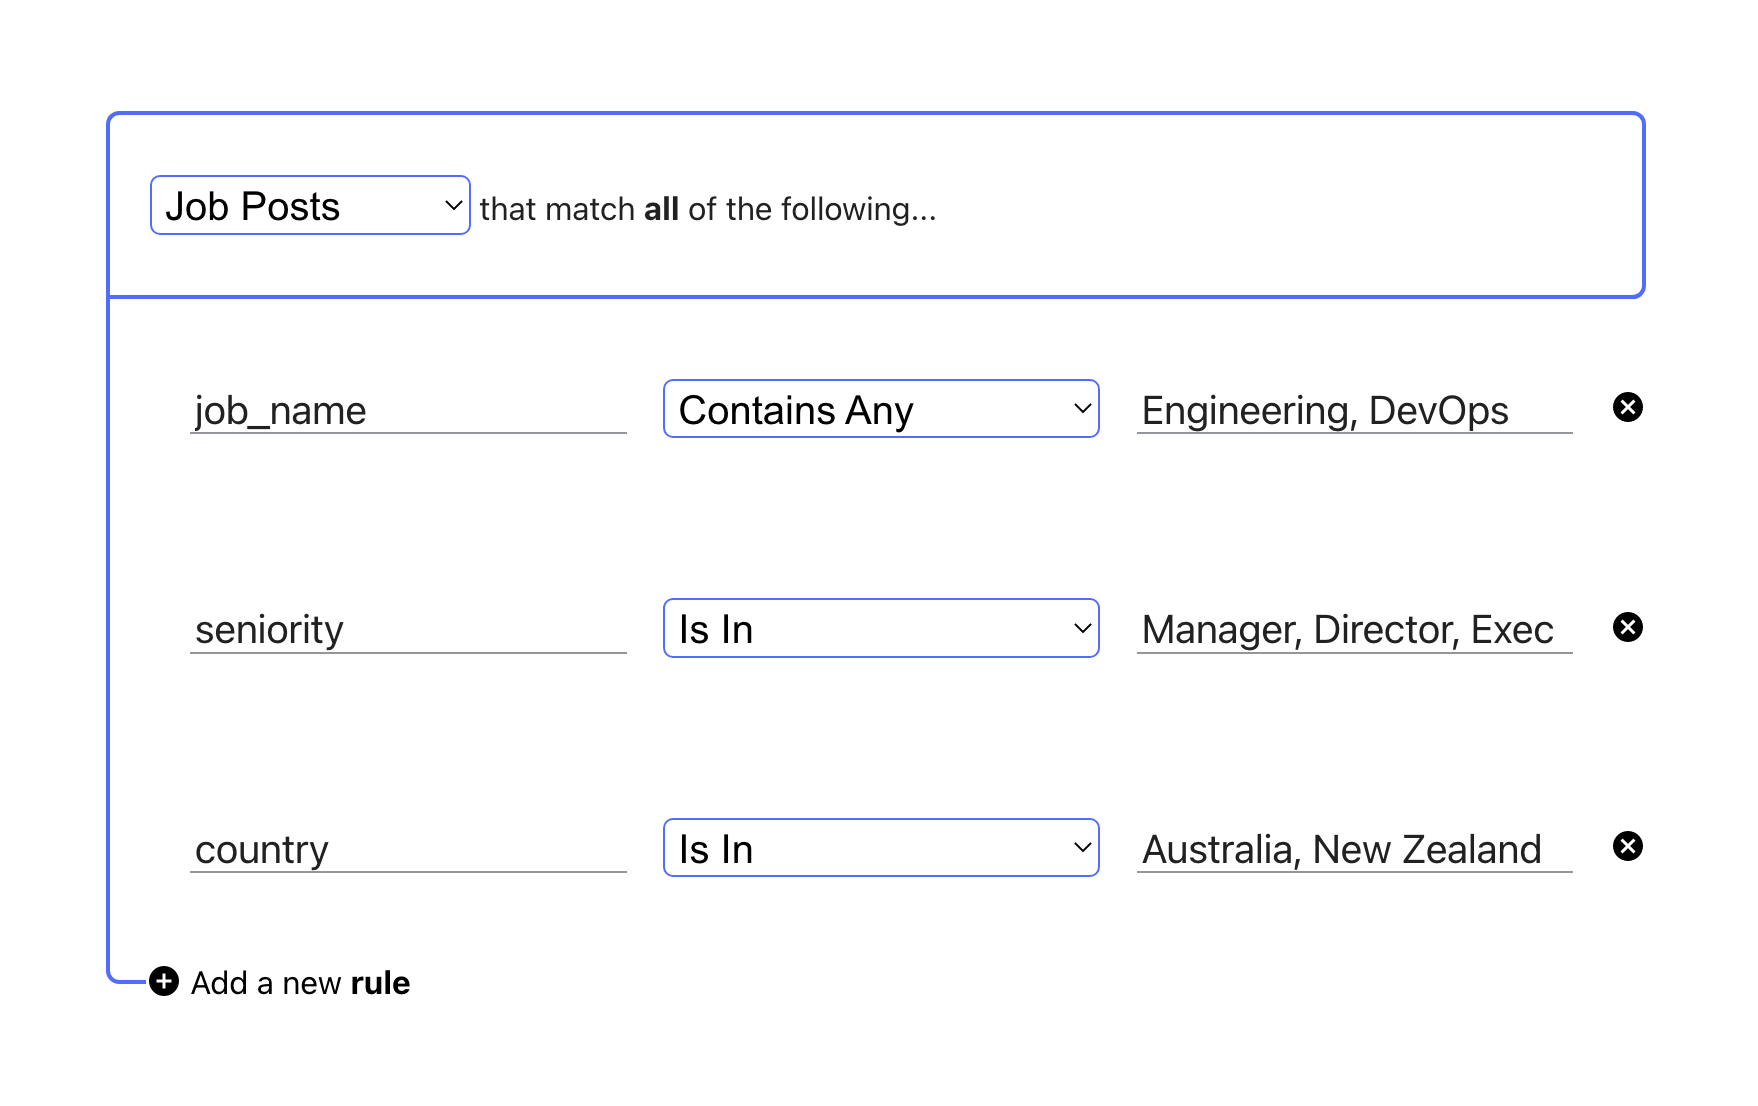 An example of a SourceStack query specifying active job posts with either Engineering or DevOps in the job's name, with a seniority of Manager or above, in either Australia or New Zealand